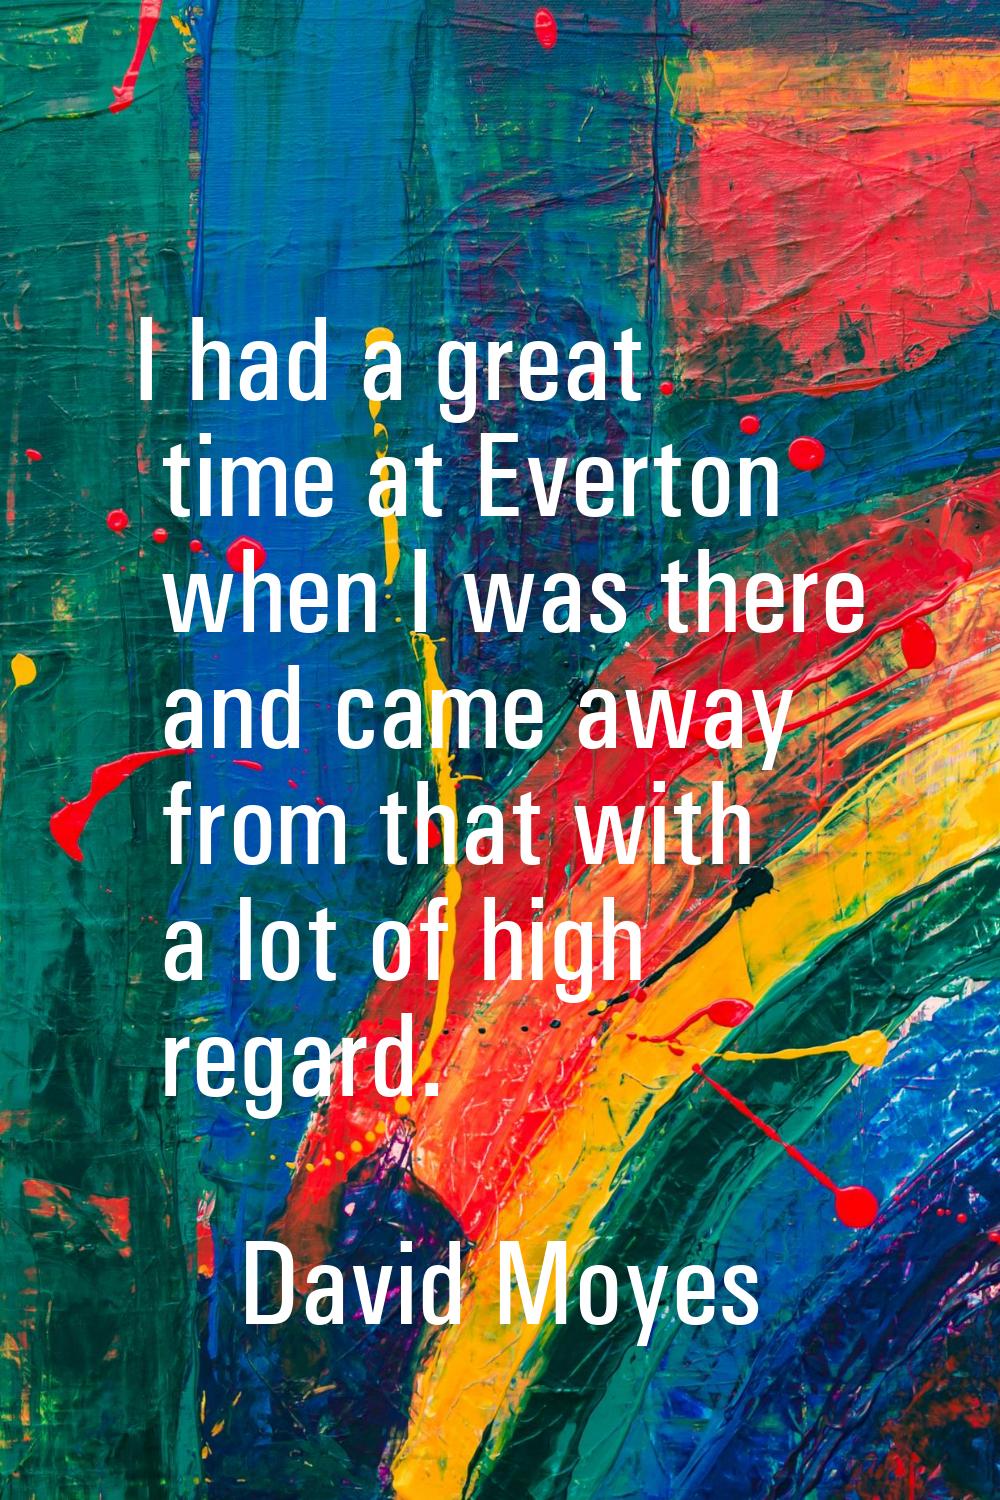 I had a great time at Everton when I was there and came away from that with a lot of high regard.